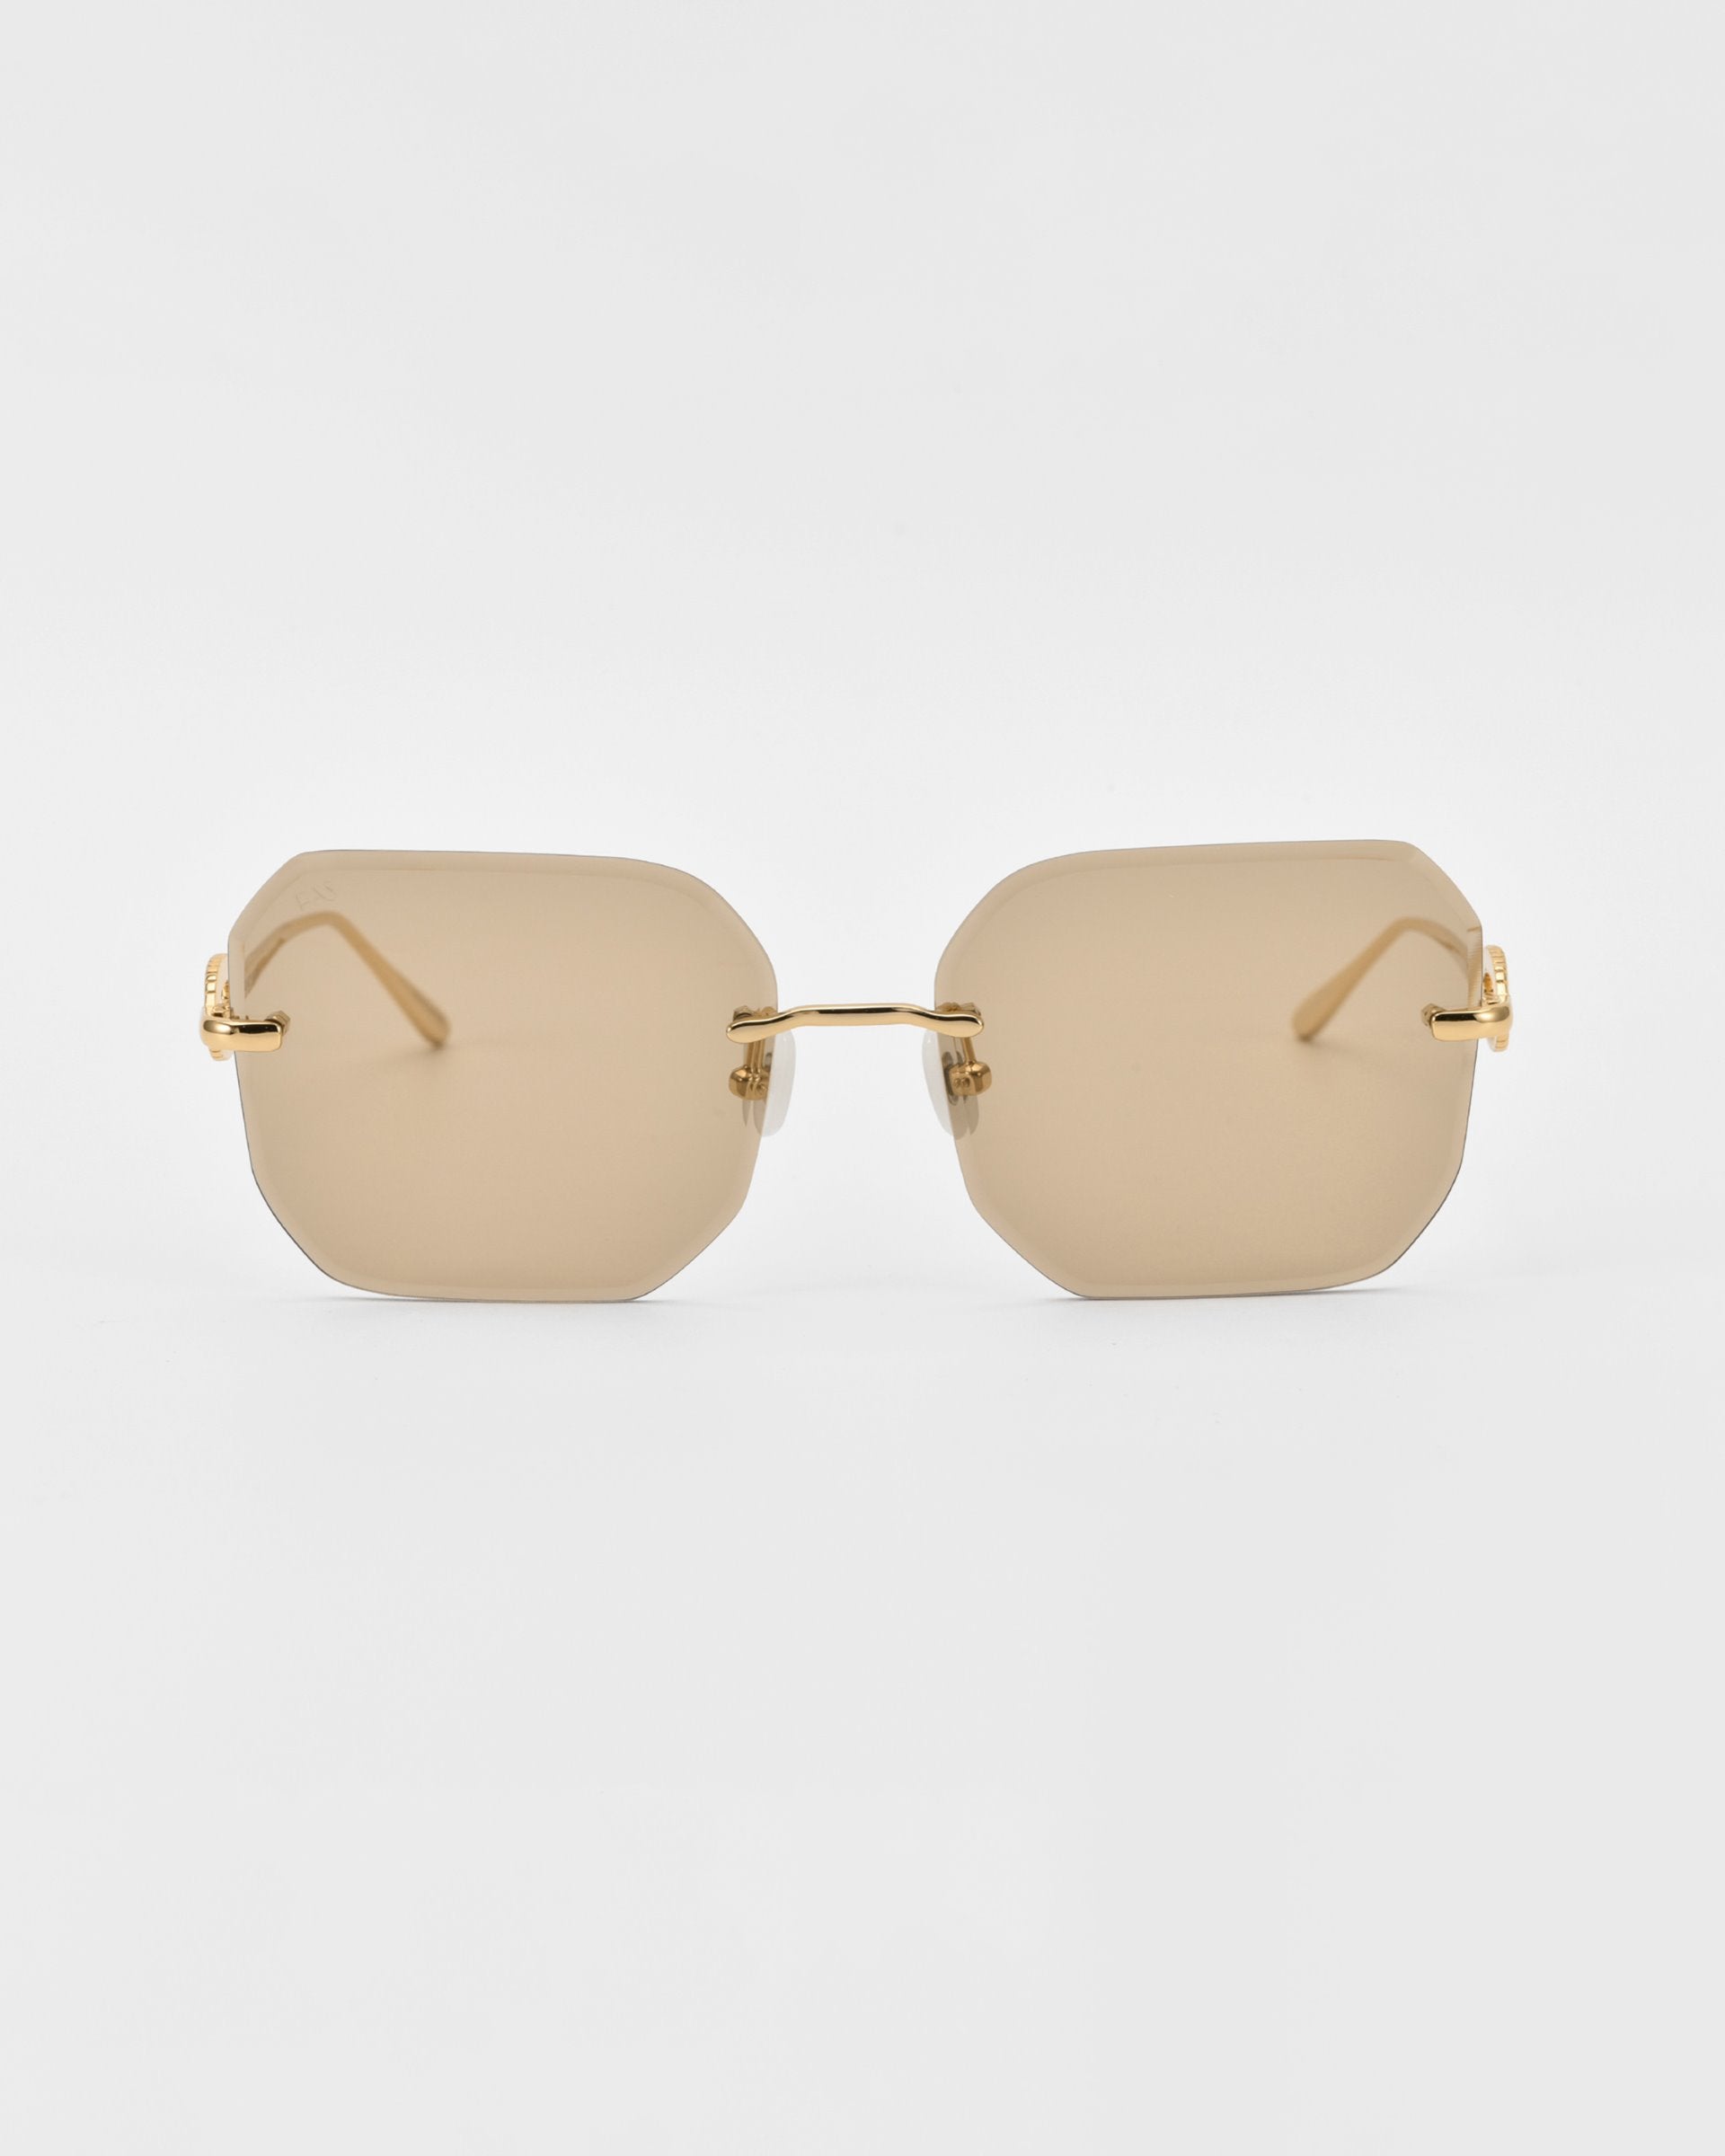 A pair of stylish For Art's Sake® Aria sunglasses featuring frameless, diamond-cut lenses with a rectangular, brown tint and gold metal arms. Jade-stone nose pads add a touch of elegance as they rest gently on the plain white background.